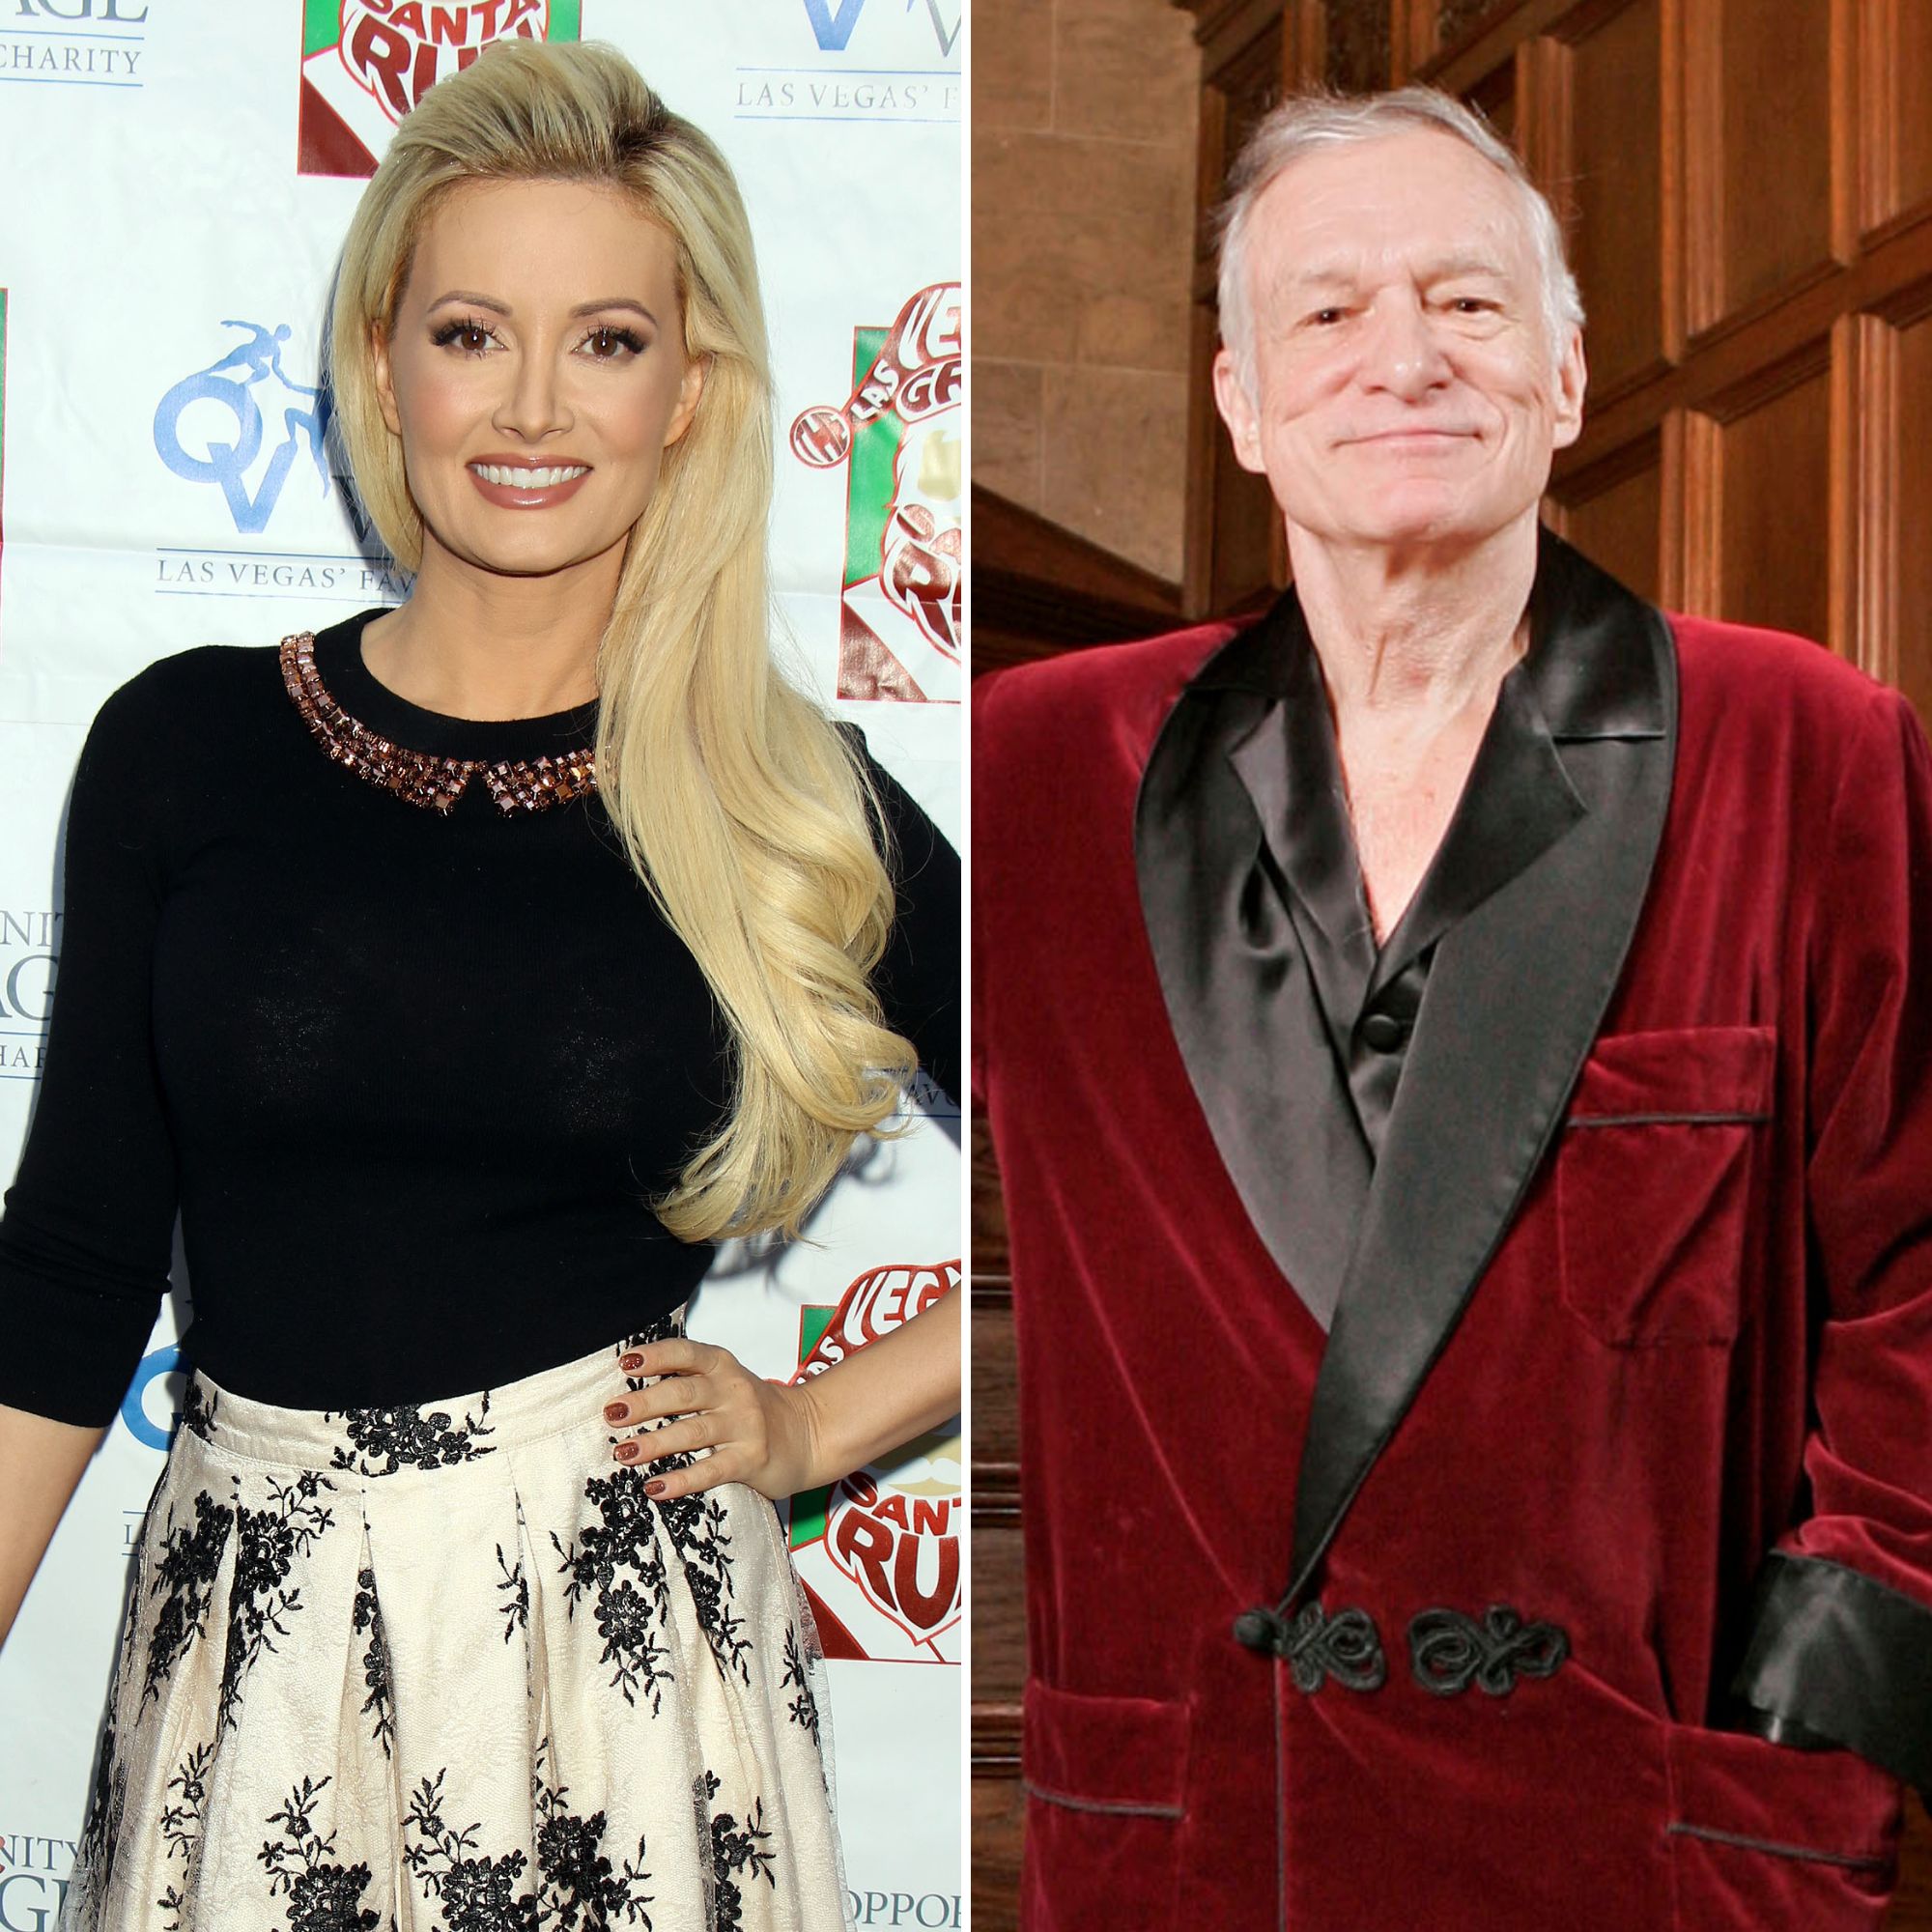 Holly Madisons Quotes on Sex Life With Hugh Hefner